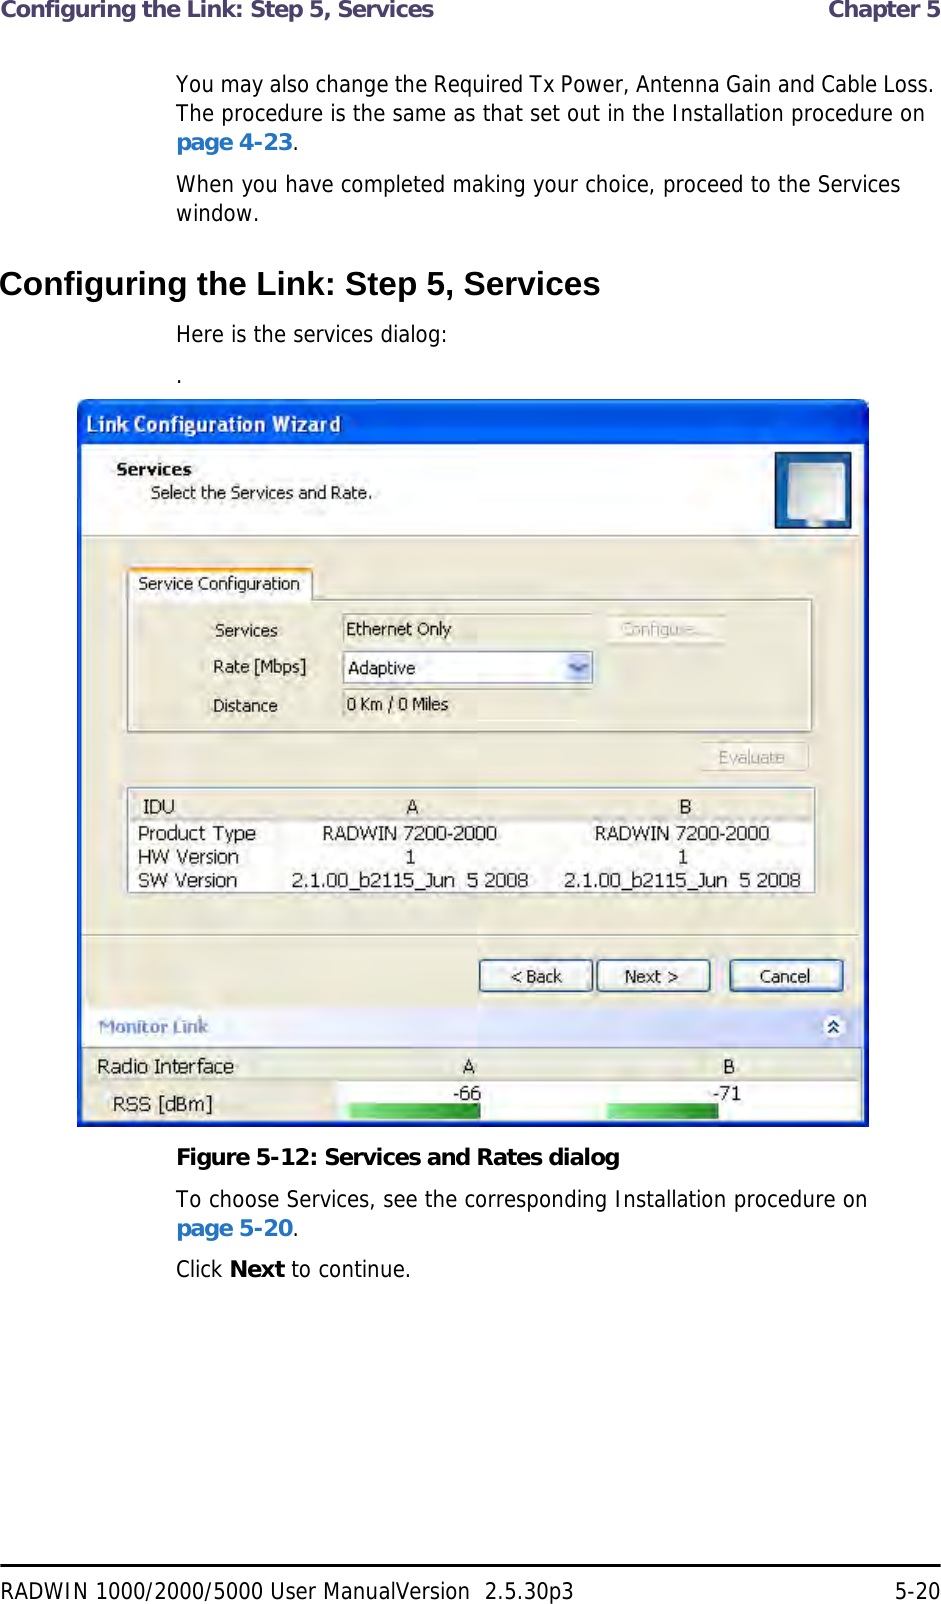 Configuring the Link: Step 5, Services  Chapter 5RADWIN 1000/2000/5000 User ManualVersion  2.5.30p3 5-20You may also change the Required Tx Power, Antenna Gain and Cable Loss. The procedure is the same as that set out in the Installation procedure on page 4-23.When you have completed making your choice, proceed to the Services window.Configuring the Link: Step 5, ServicesHere is the services dialog:.Figure 5-12: Services and Rates dialogTo choose Services, see the corresponding Installation procedure on page 5-20.Click Next to continue.